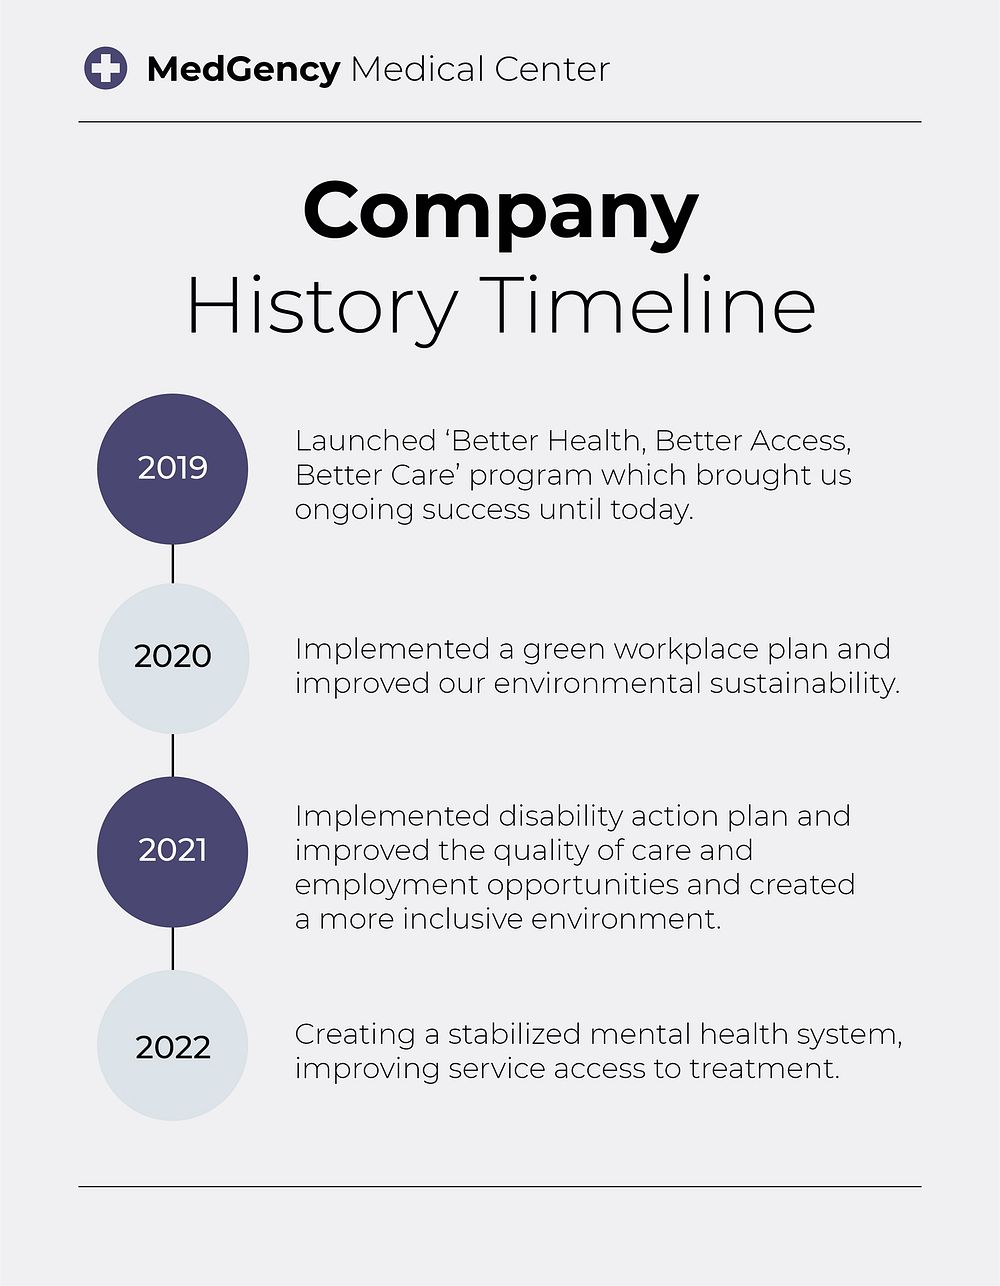 Company timeline infographic flyer template, medical business psd